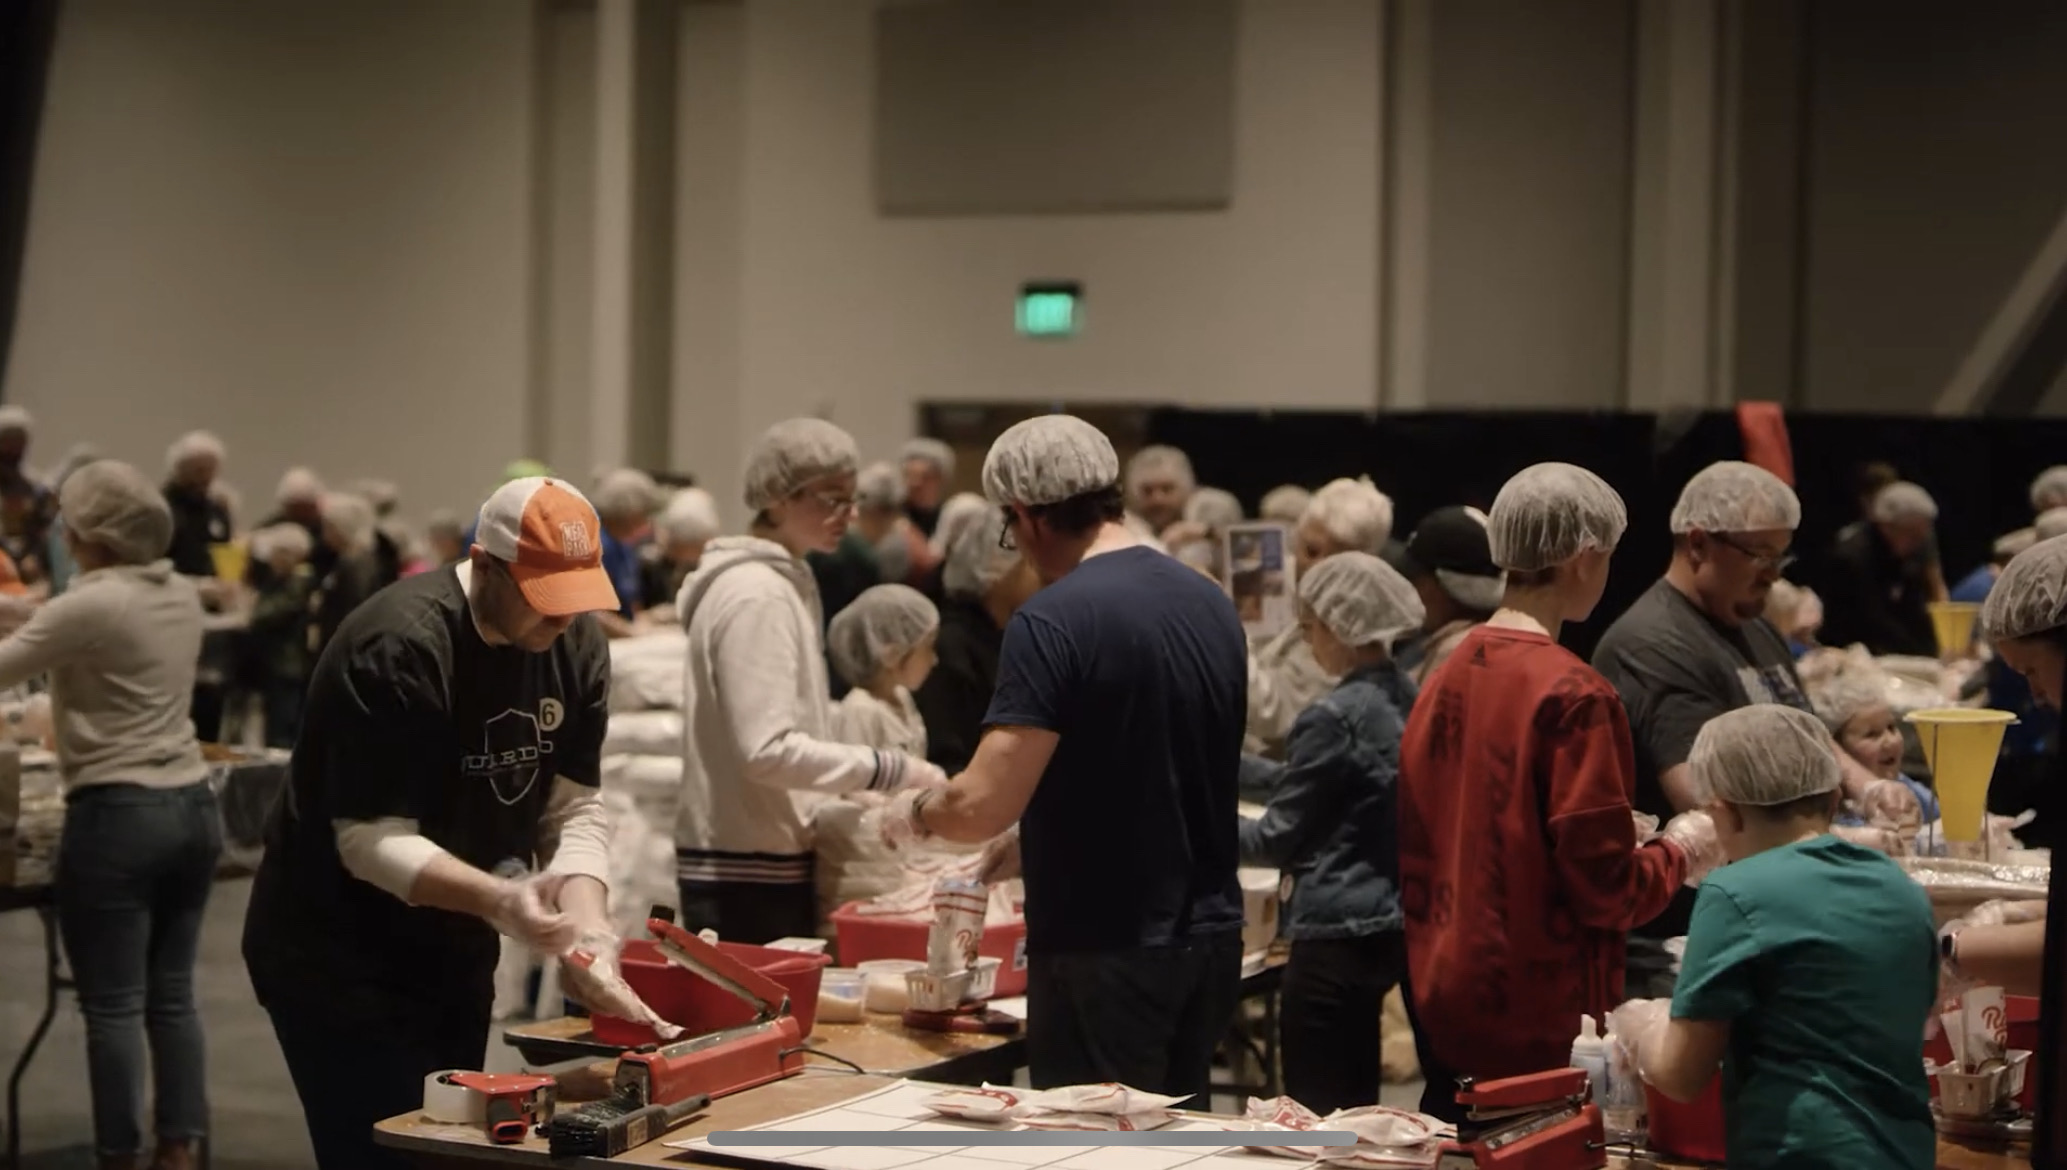 “Divine tailwind” drives large-scale food packing event